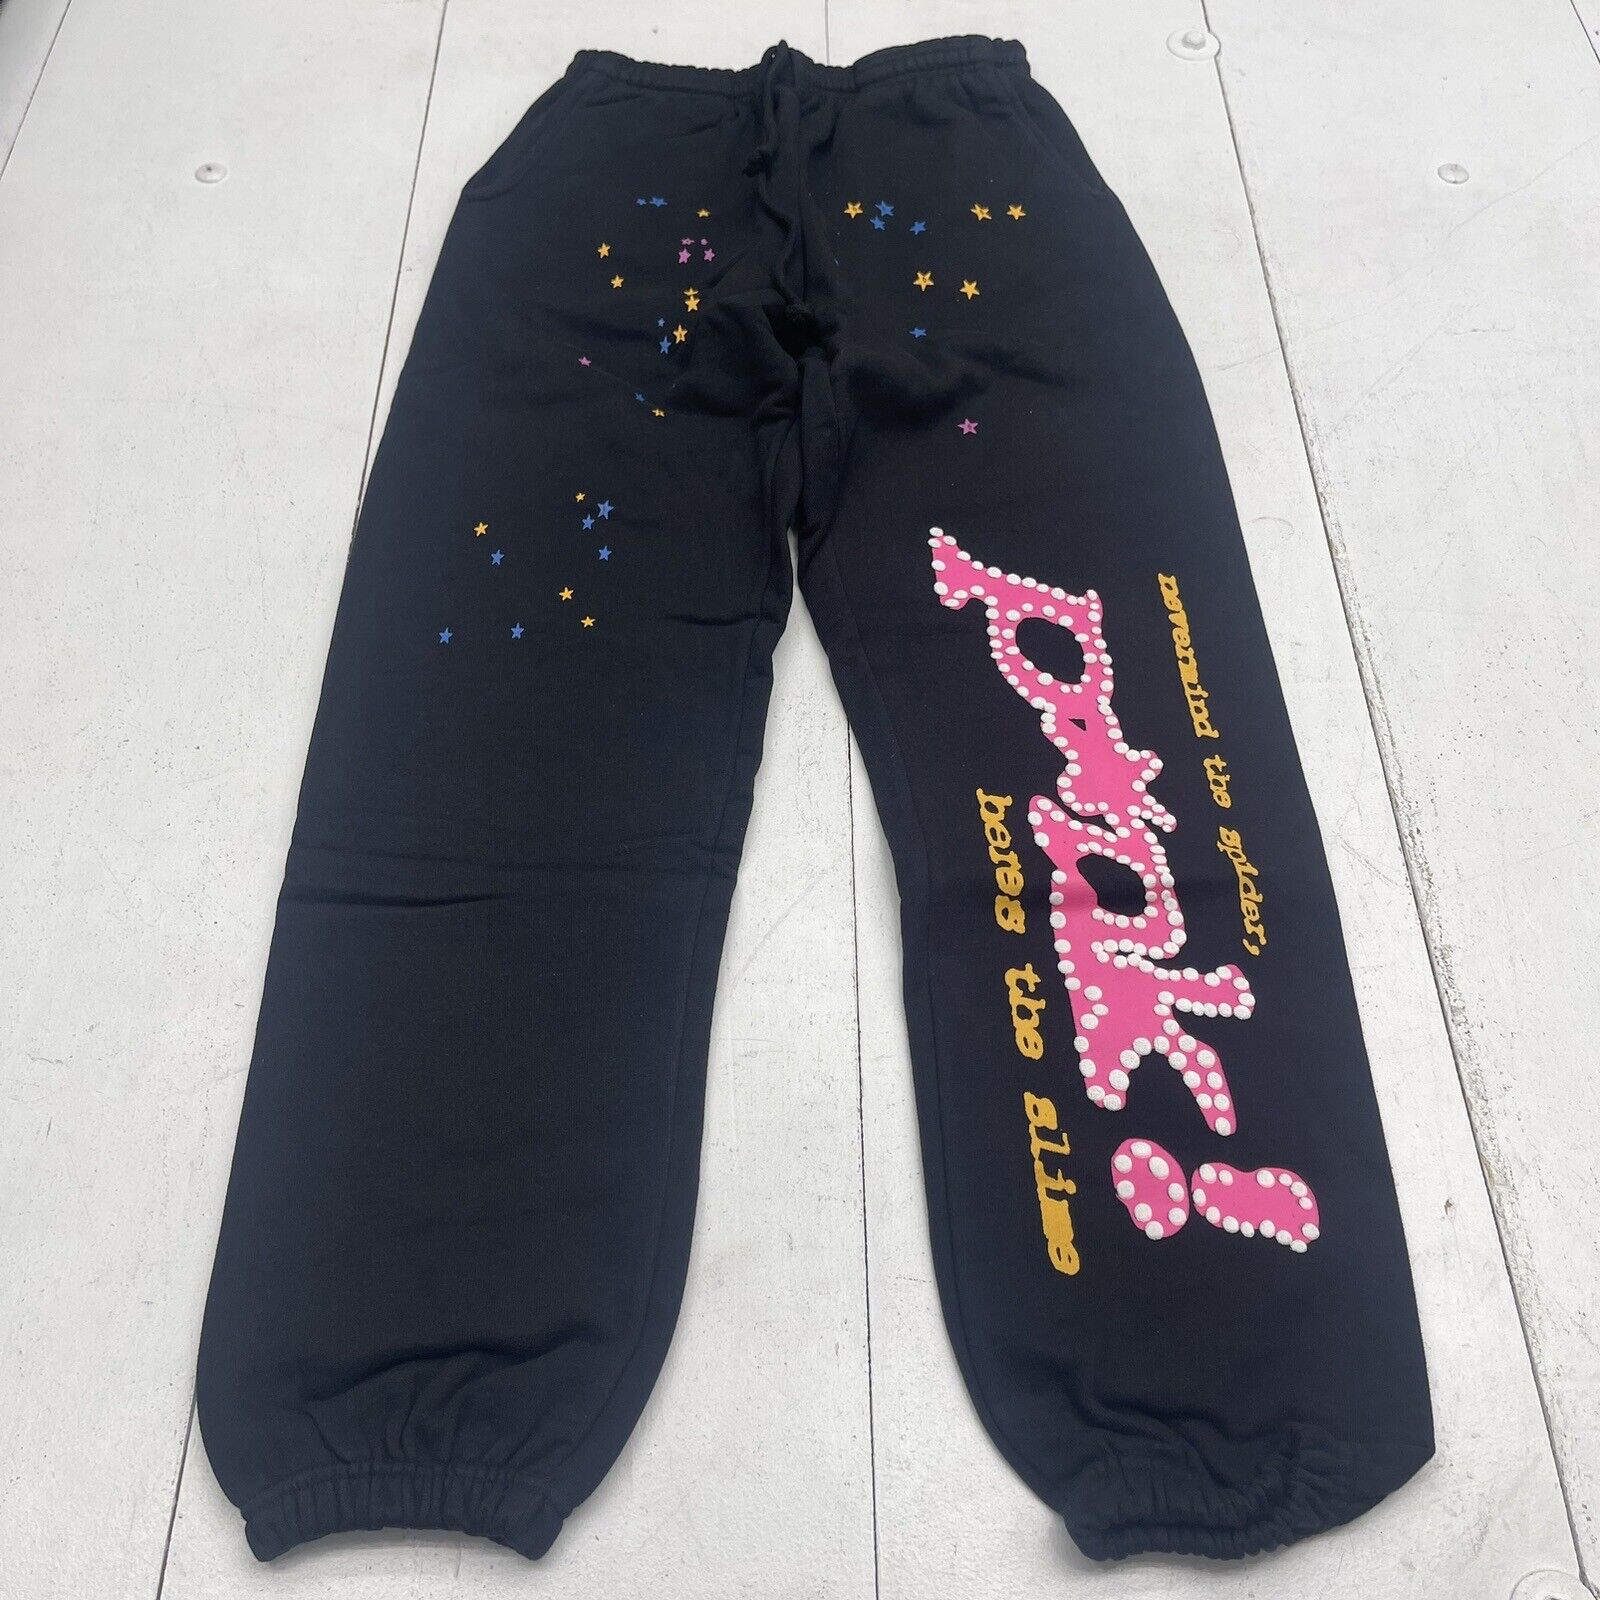 Sp5der Black Pink Graphic Sweatpants Mens Size Small New